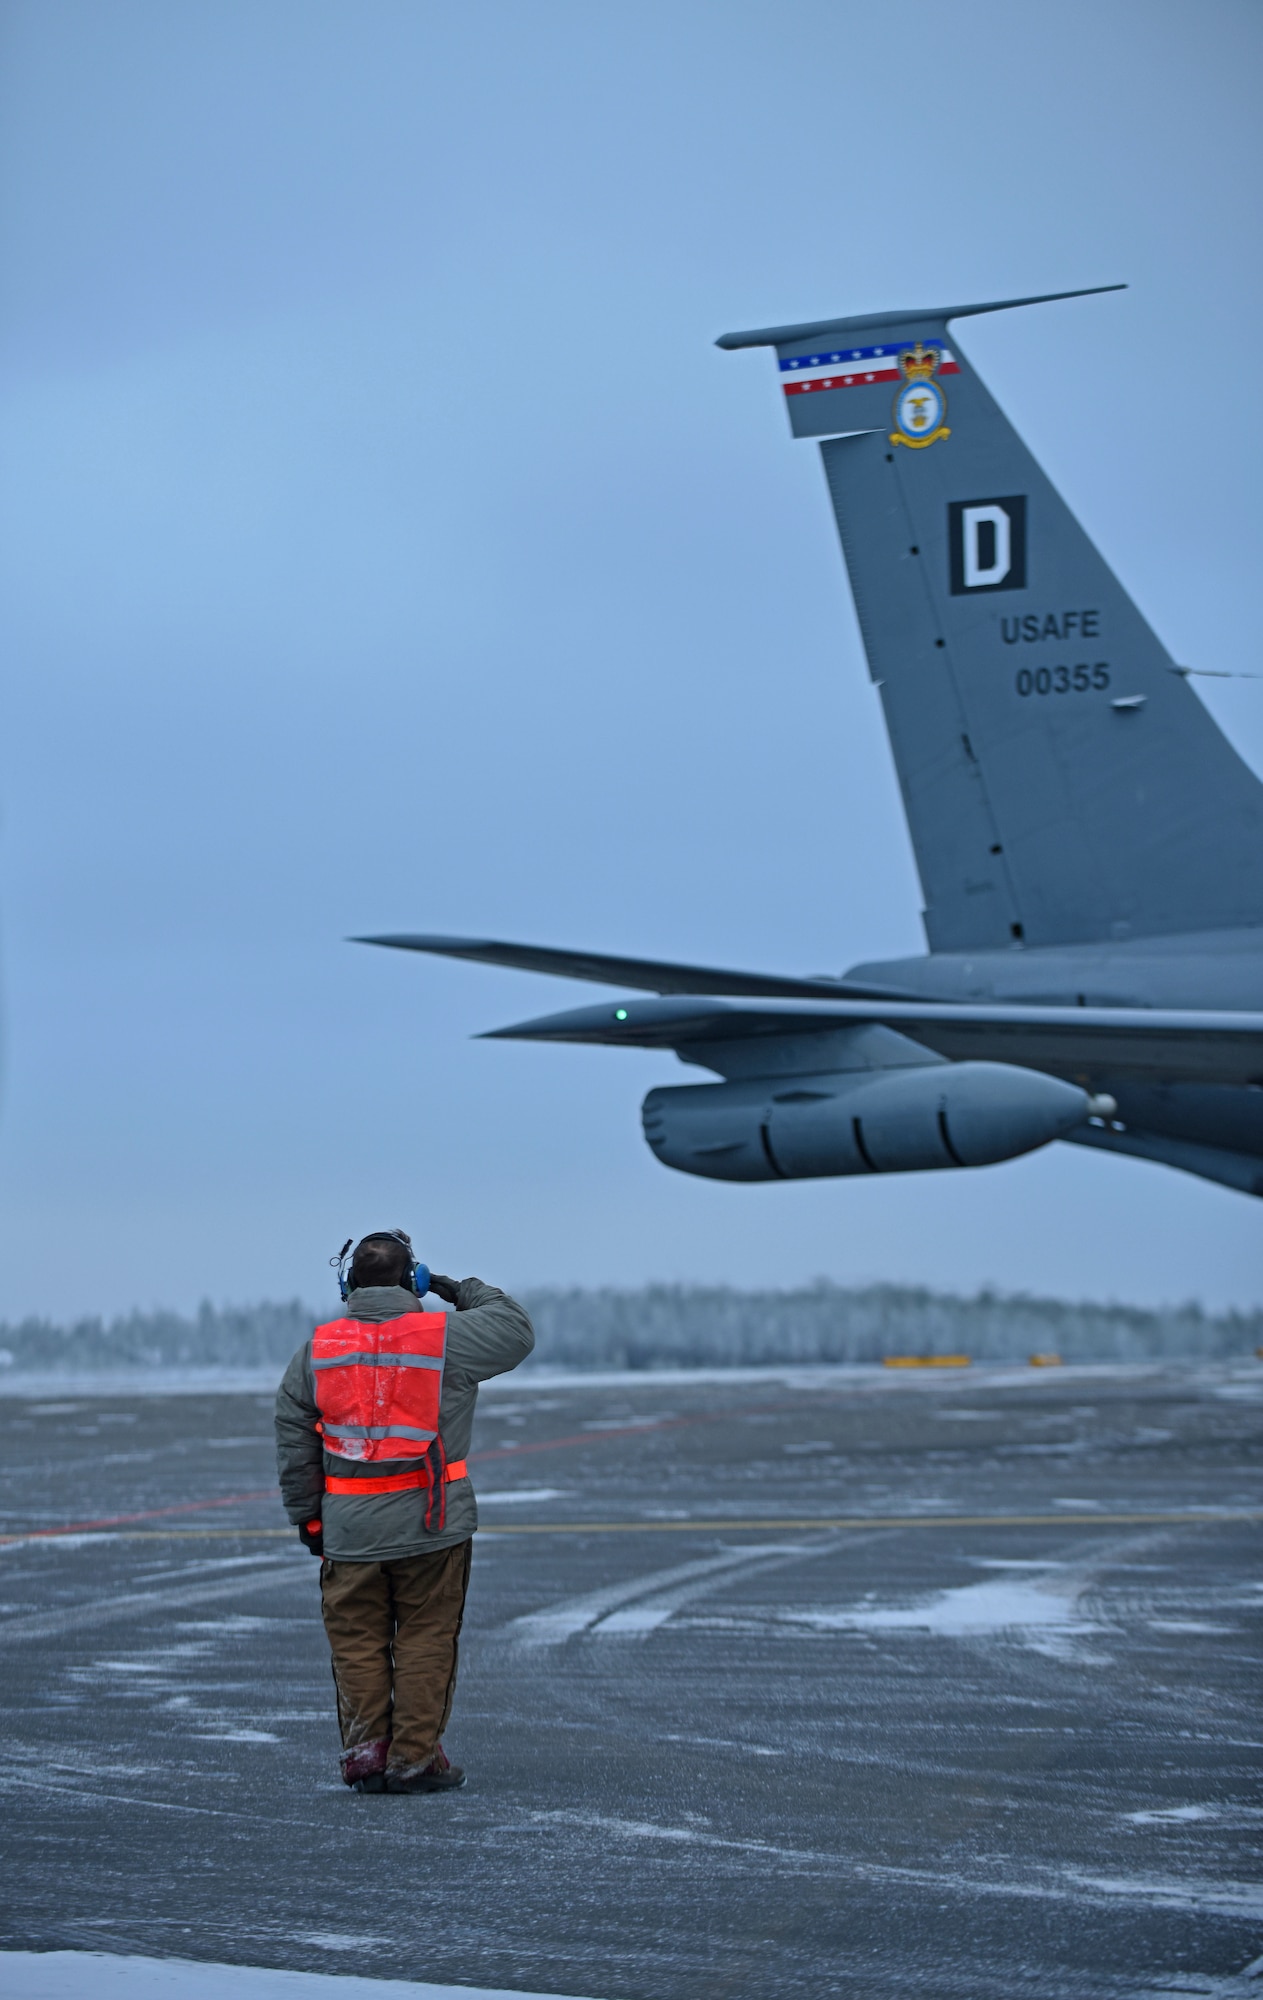 U.S. Air Force Senior Airman Nicholas Vidmar, 100th Aircraft Maintenance Squadron crew chief, salutes after marshalling a U.S. Air Force KC-135 Stratotanker before takeoff to conduct aerial refueling training during Exercise Trident Juncture 18, at Rovaniemi, Finland, Oct. 27, 2018. Trident Juncture is the largest NATO exercise since 2002, with more than 50,000 military members from 31 nations. The U.S. military makes up approximately a quarter of the participating personnel. (U.S. Air Force photo by Senior Airman Luke Milano)